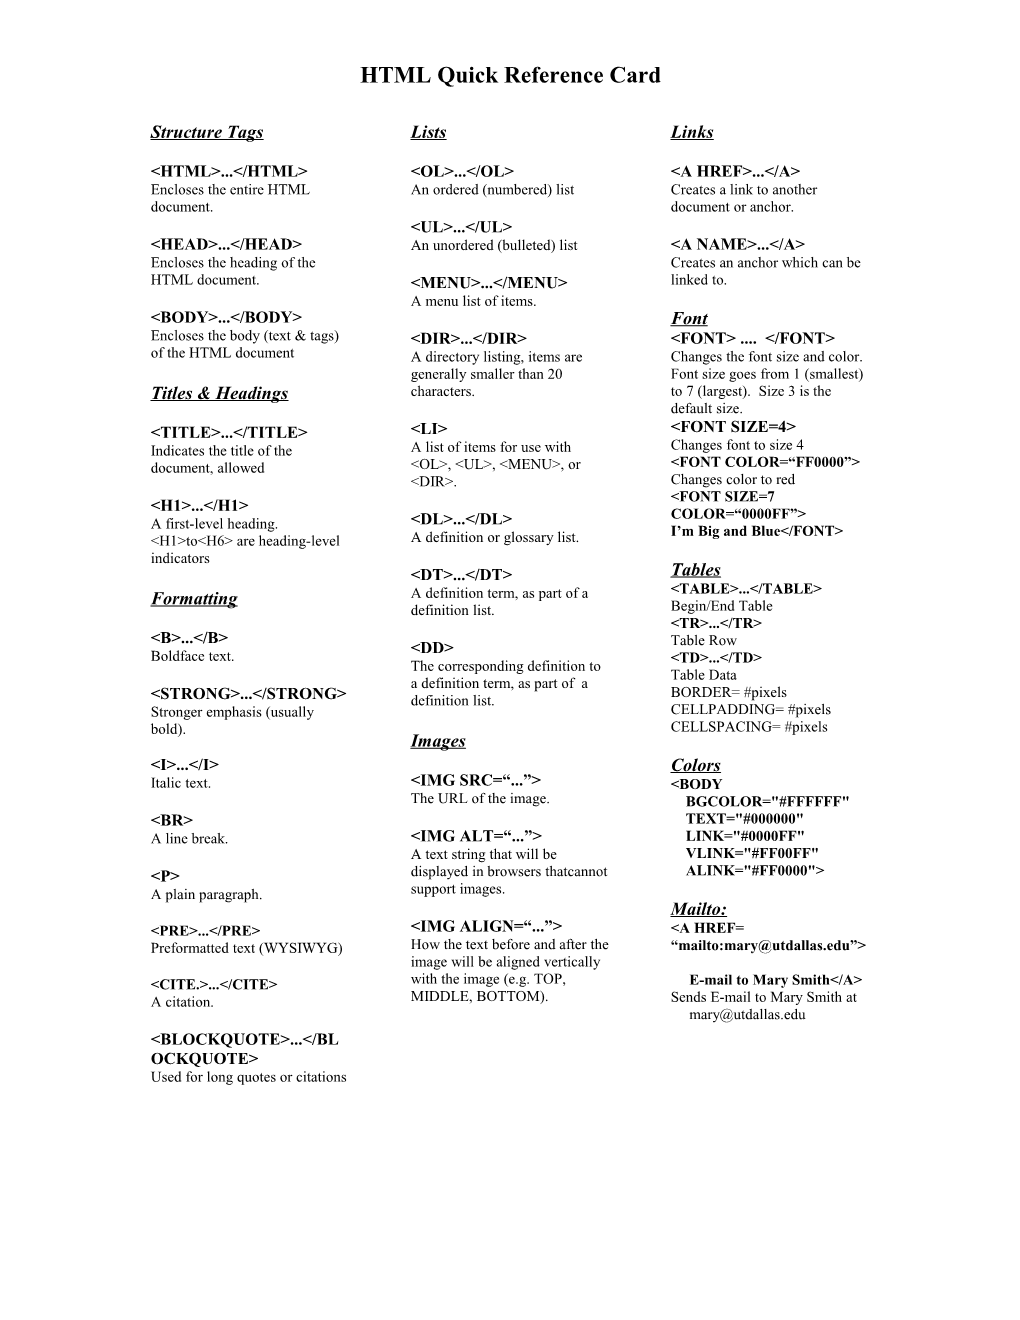 HTML Quick Reference Card